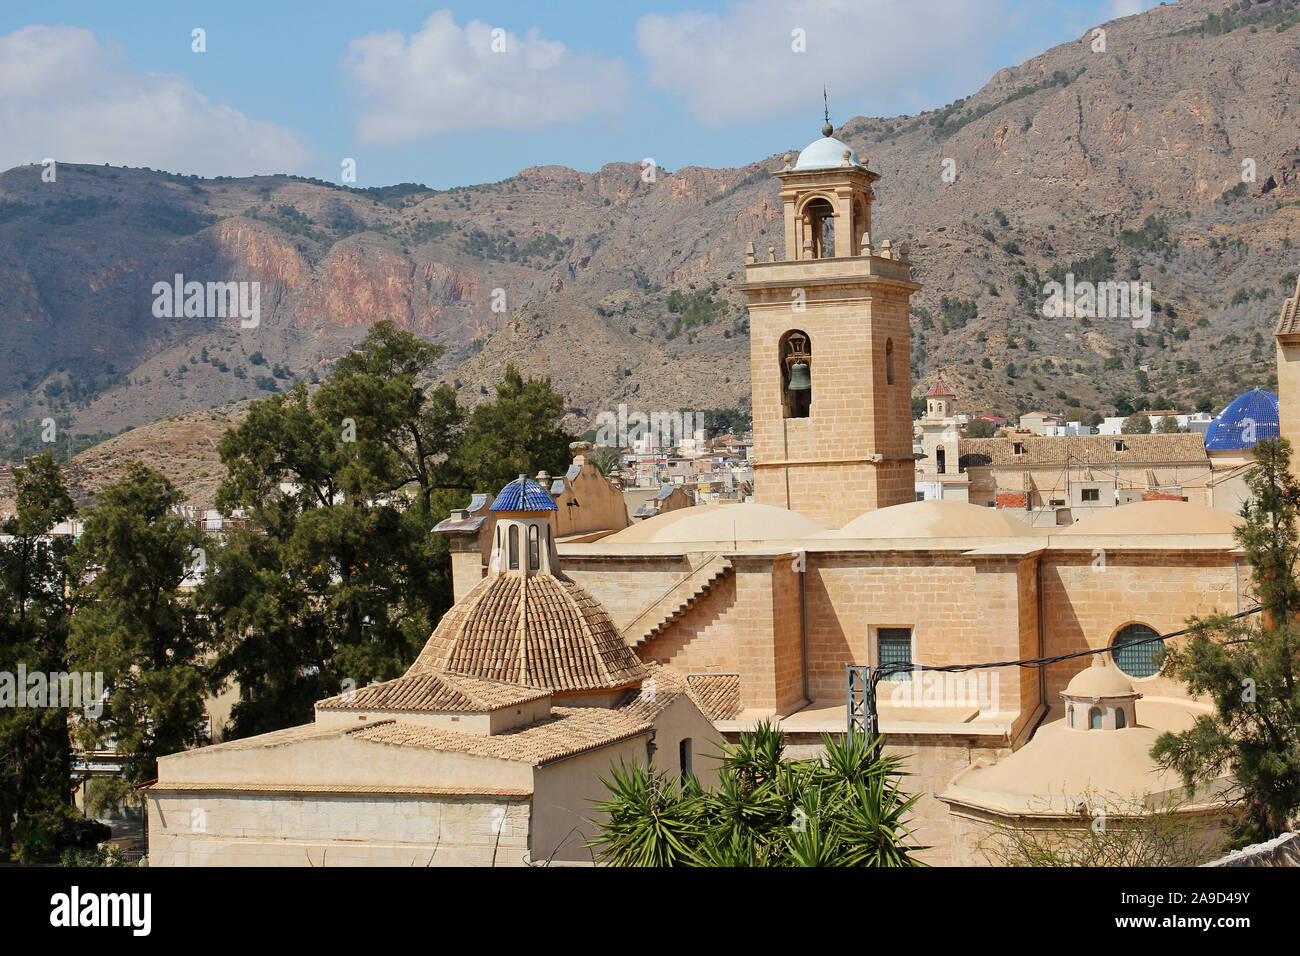 A view across the roof of the  fifteenth century Church of Santiago Apóstol, in Orihuela, Alicante Province, Spain, to the mountains beyond. Stock Photo